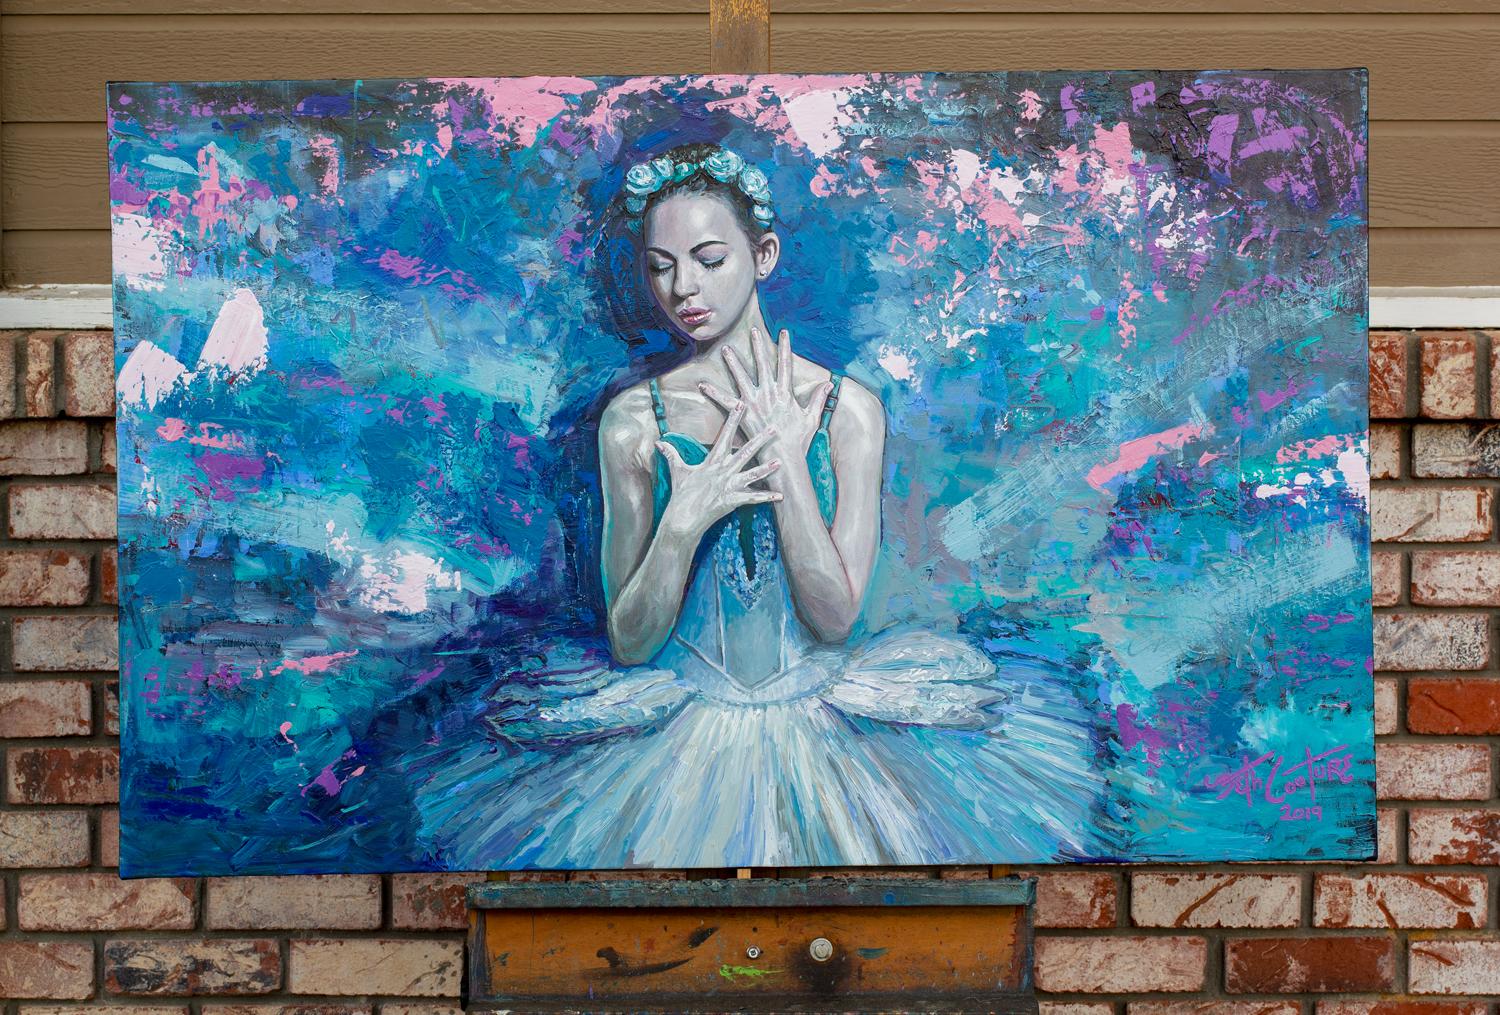 <p>Artist Comments<br>A ballet dancer wearing an antique tutu unfolds her hands to her heart with emotion. Her face calm, deep in thought. Lively brushwork of pink and peach dissolve into blue and turquoise, and frame the delicate porcelain